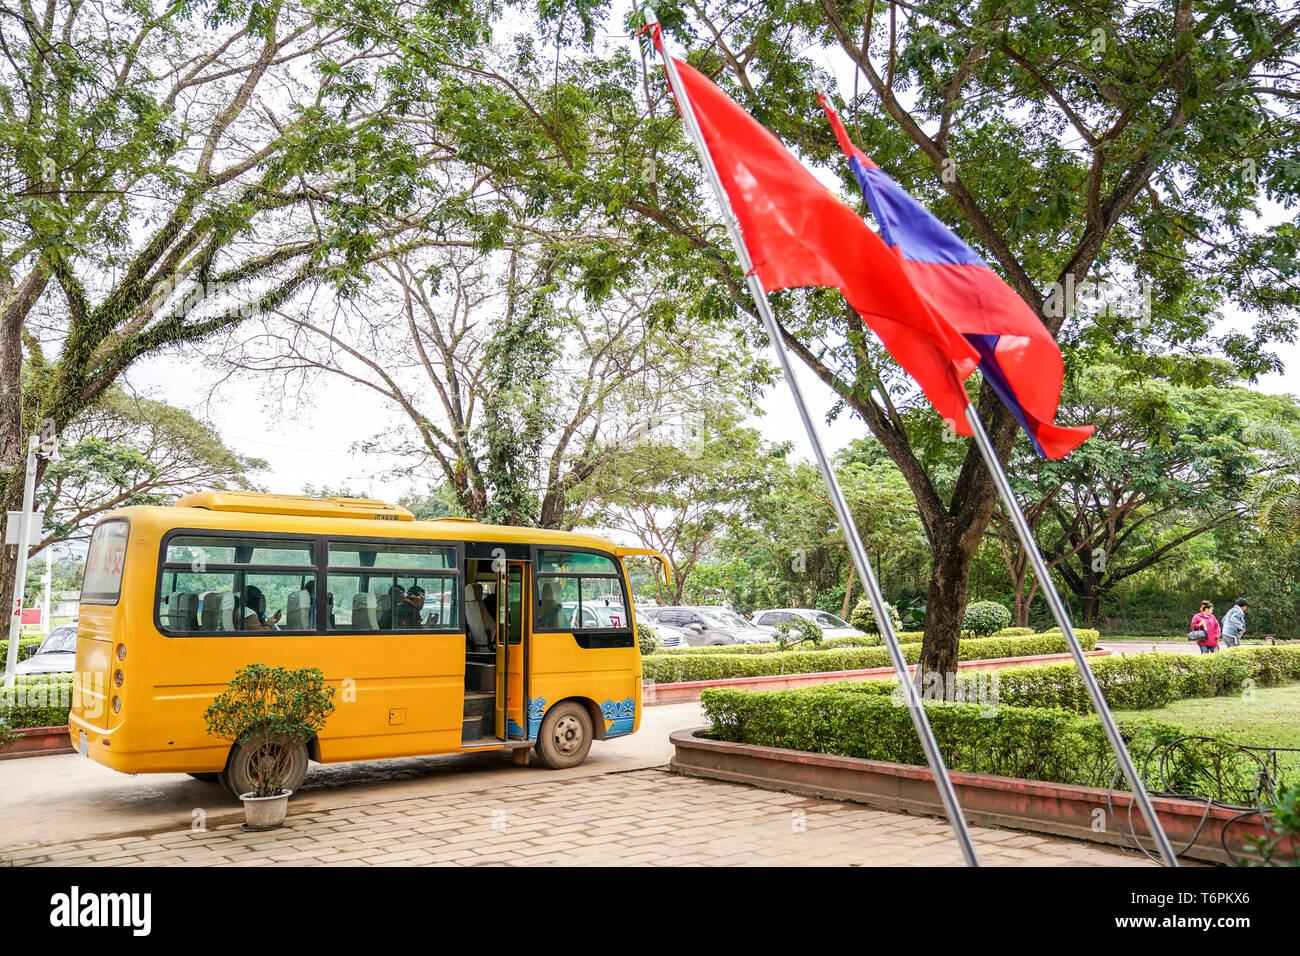 Ton Pheung district, Laos - 13 January 2018, Yellow Laos bus waiting for passengers at Golden triangle special economic zone. Stock Photo